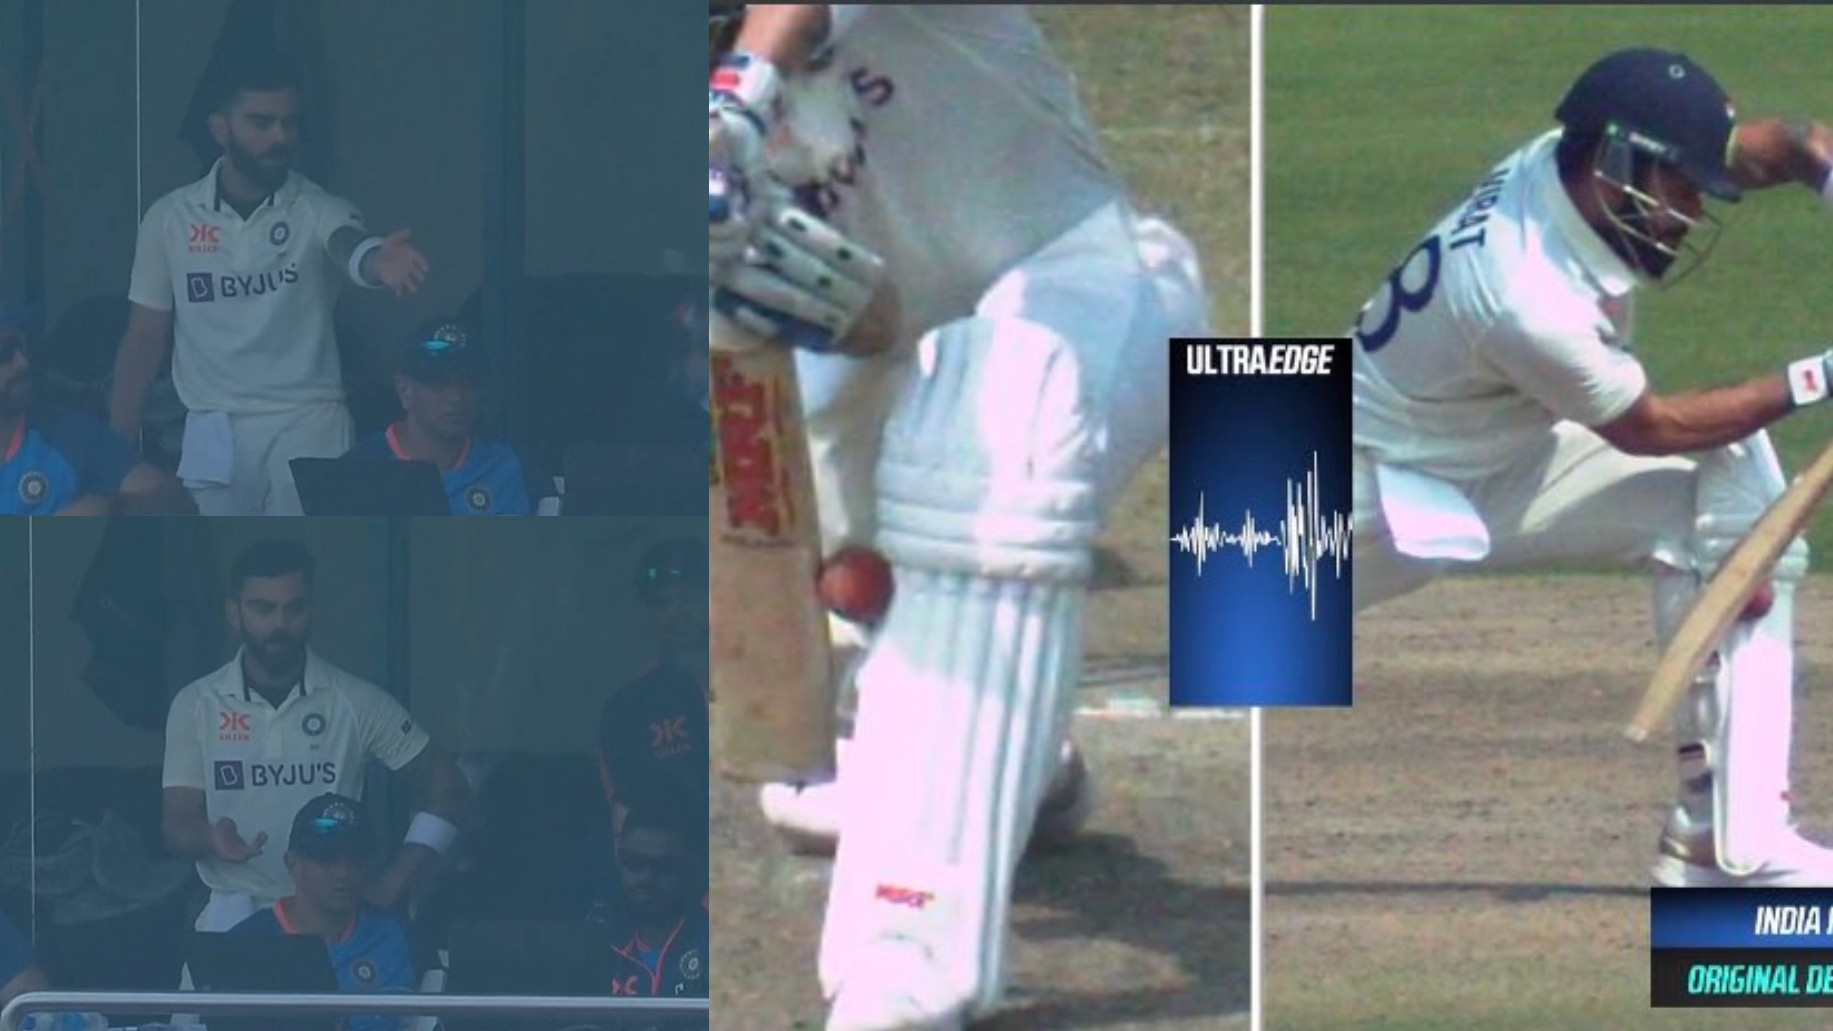 IND v AUS 2023: WATCH- Virat Kohli given out LBW despite ultra-edge suggesting edge; reacts angrily in dressing room